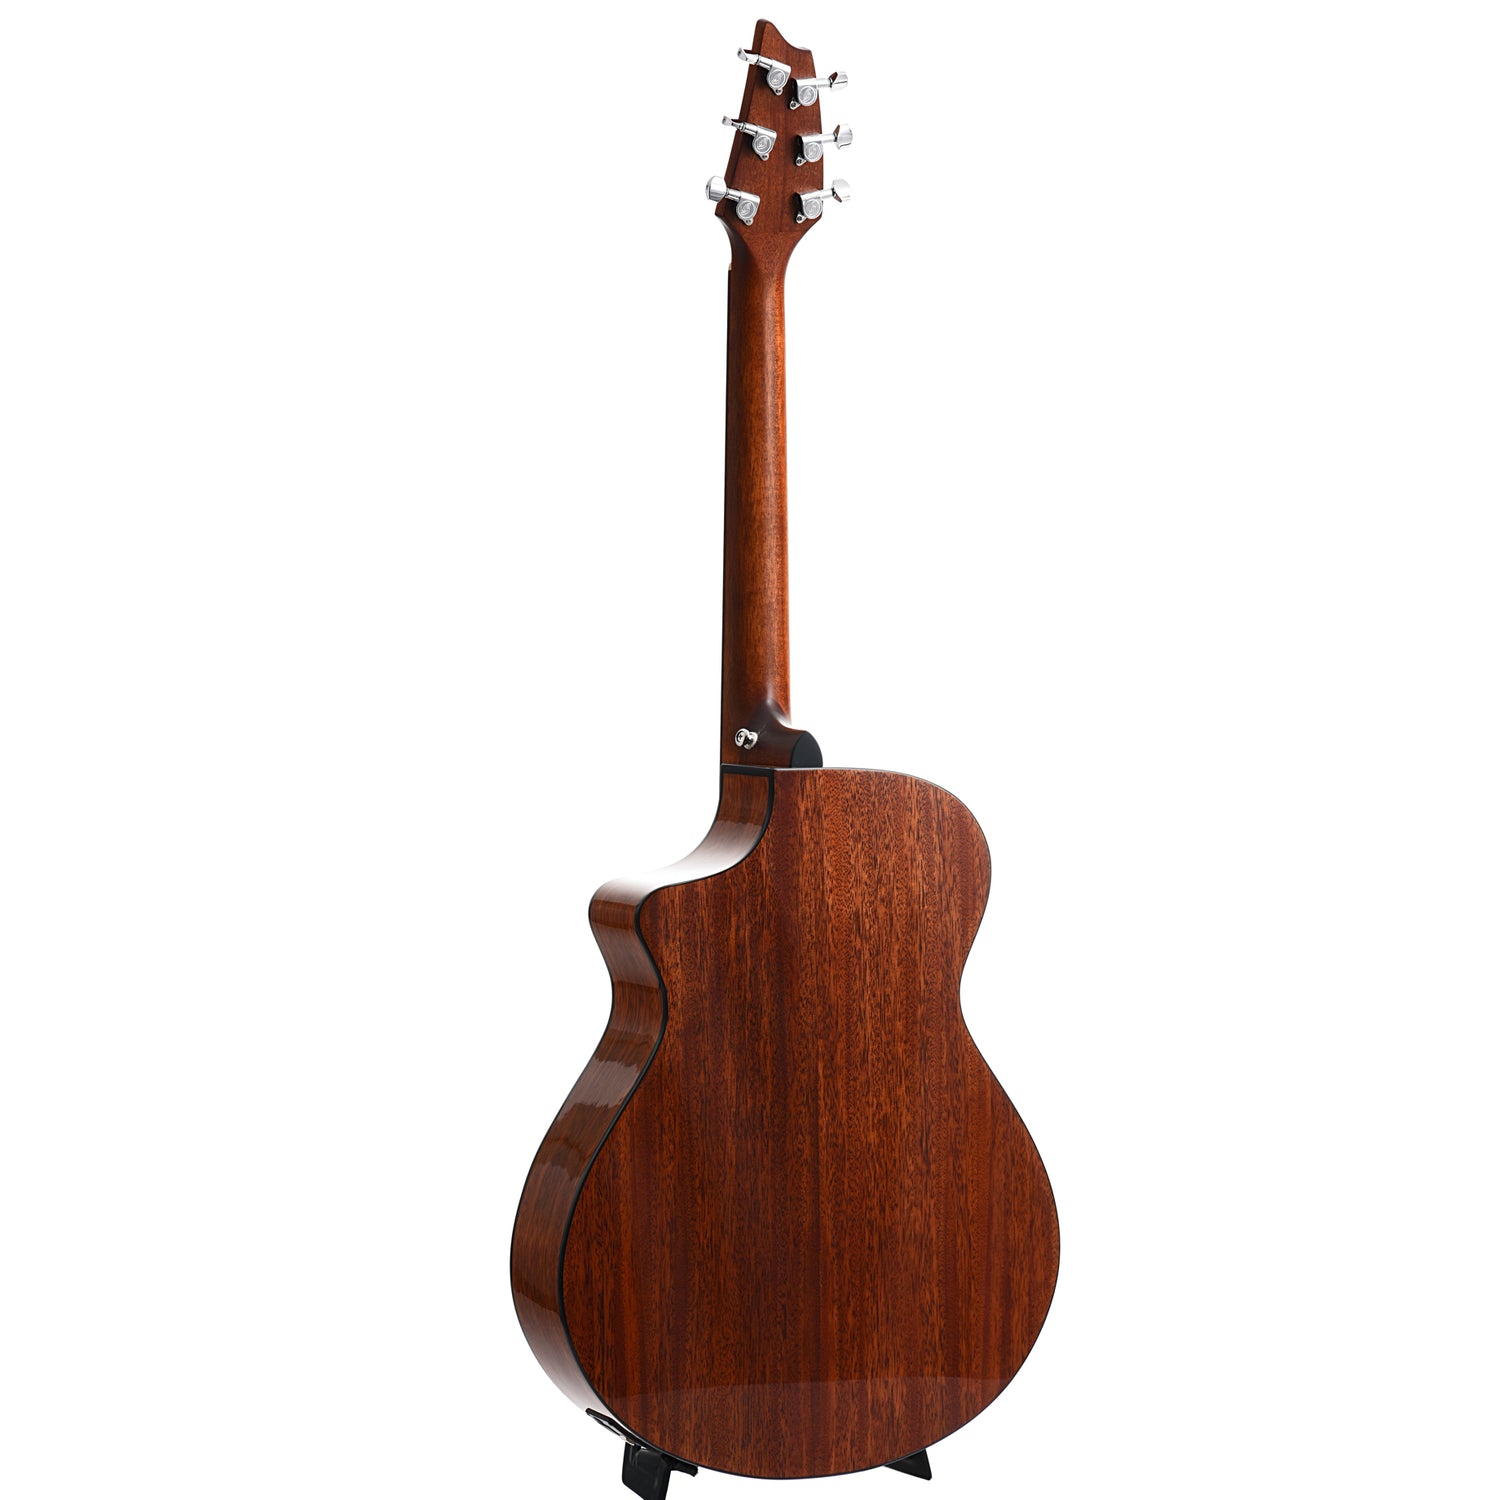 Image 12 of Breedlove Discovery S Concert Edgeburst CE Red Cedar-African Mahogany Acoustic-Electric Guitar - SKU# DSCN44CERCAM : Product Type Flat-top Guitars : Elderly Instruments